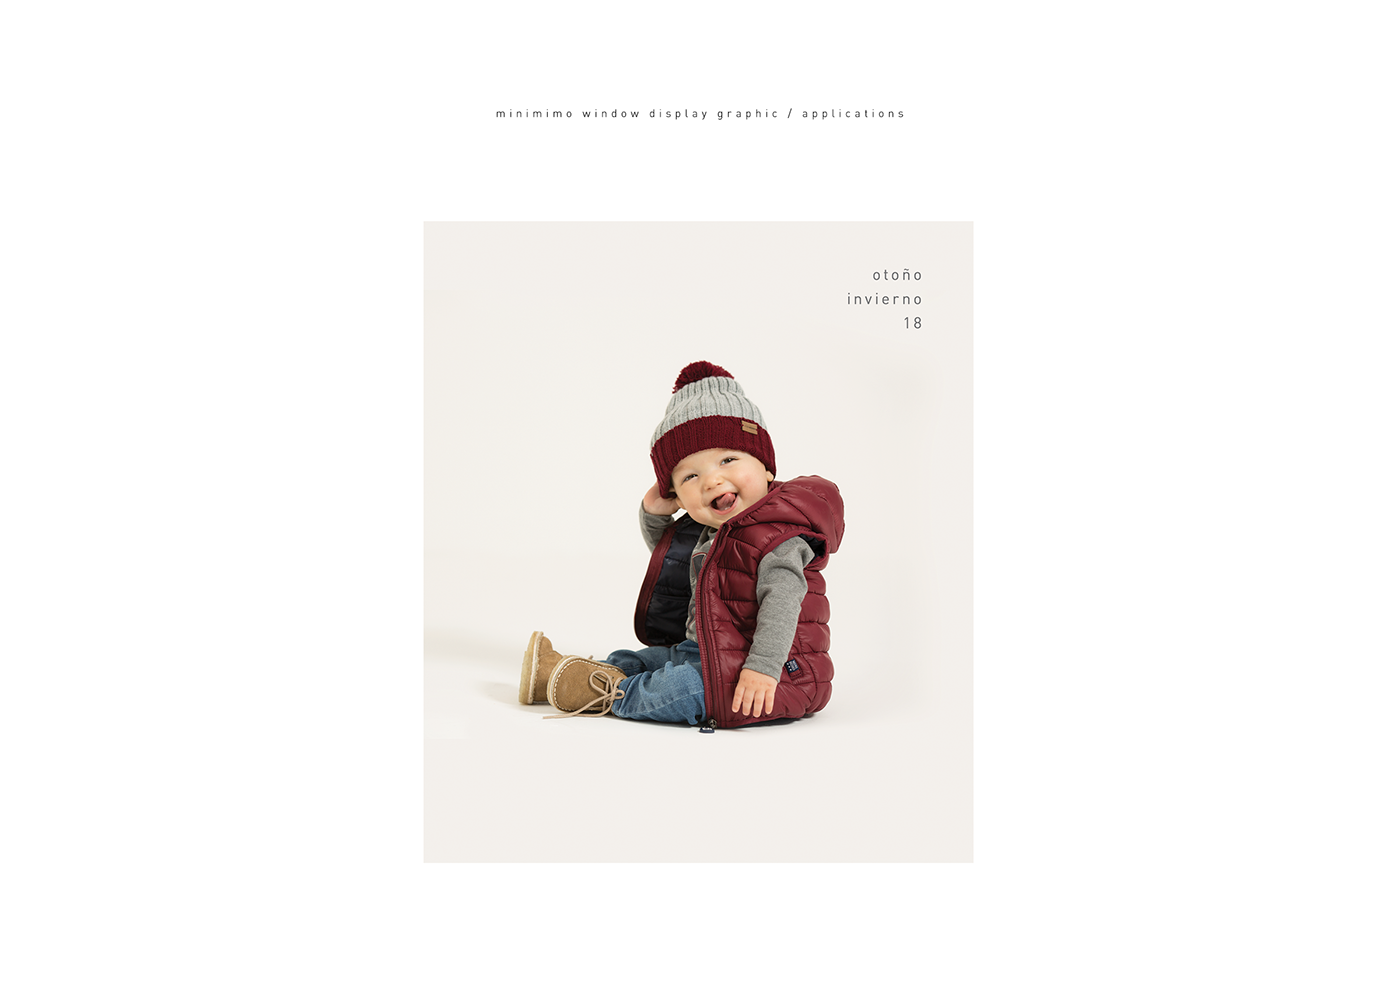 Kids Clothes Photography  argentina campaign graphic design  Art Director Mimo&Co